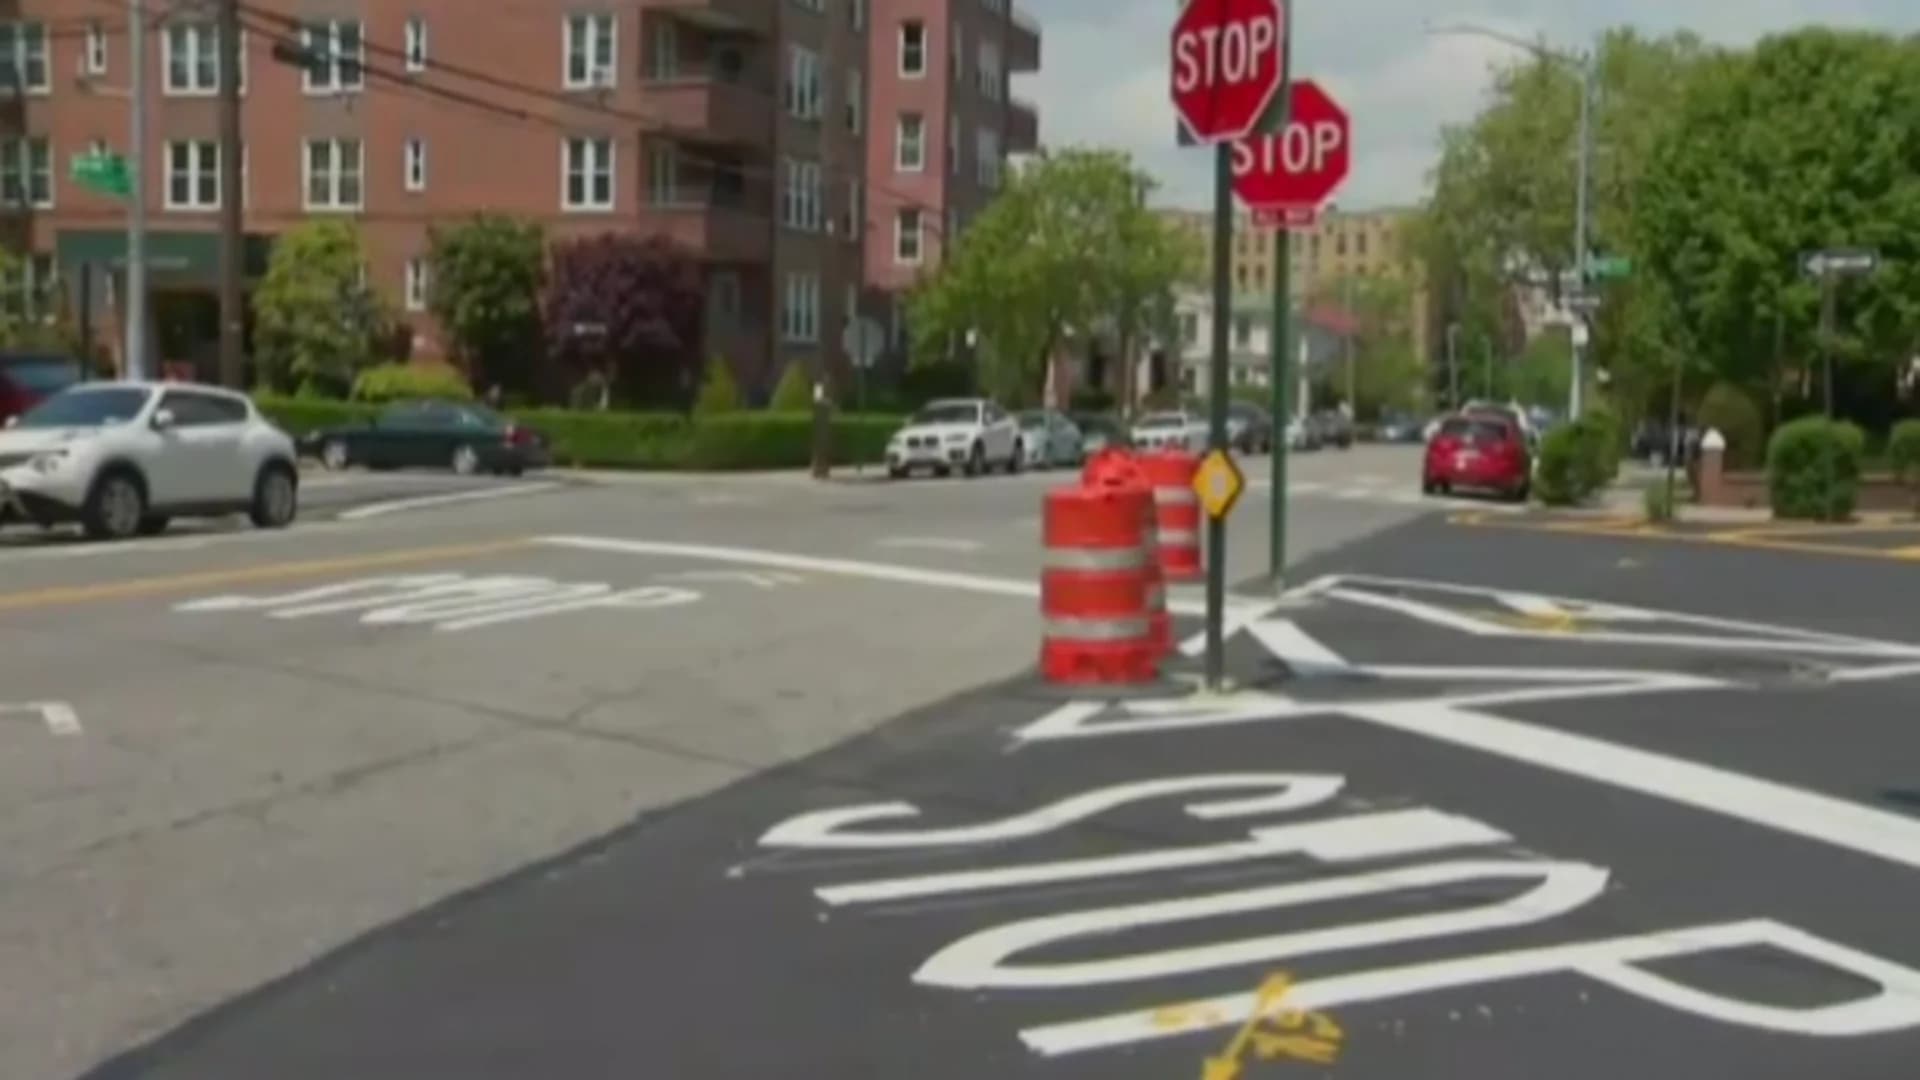 Man wants intersection changes after wife hit by car